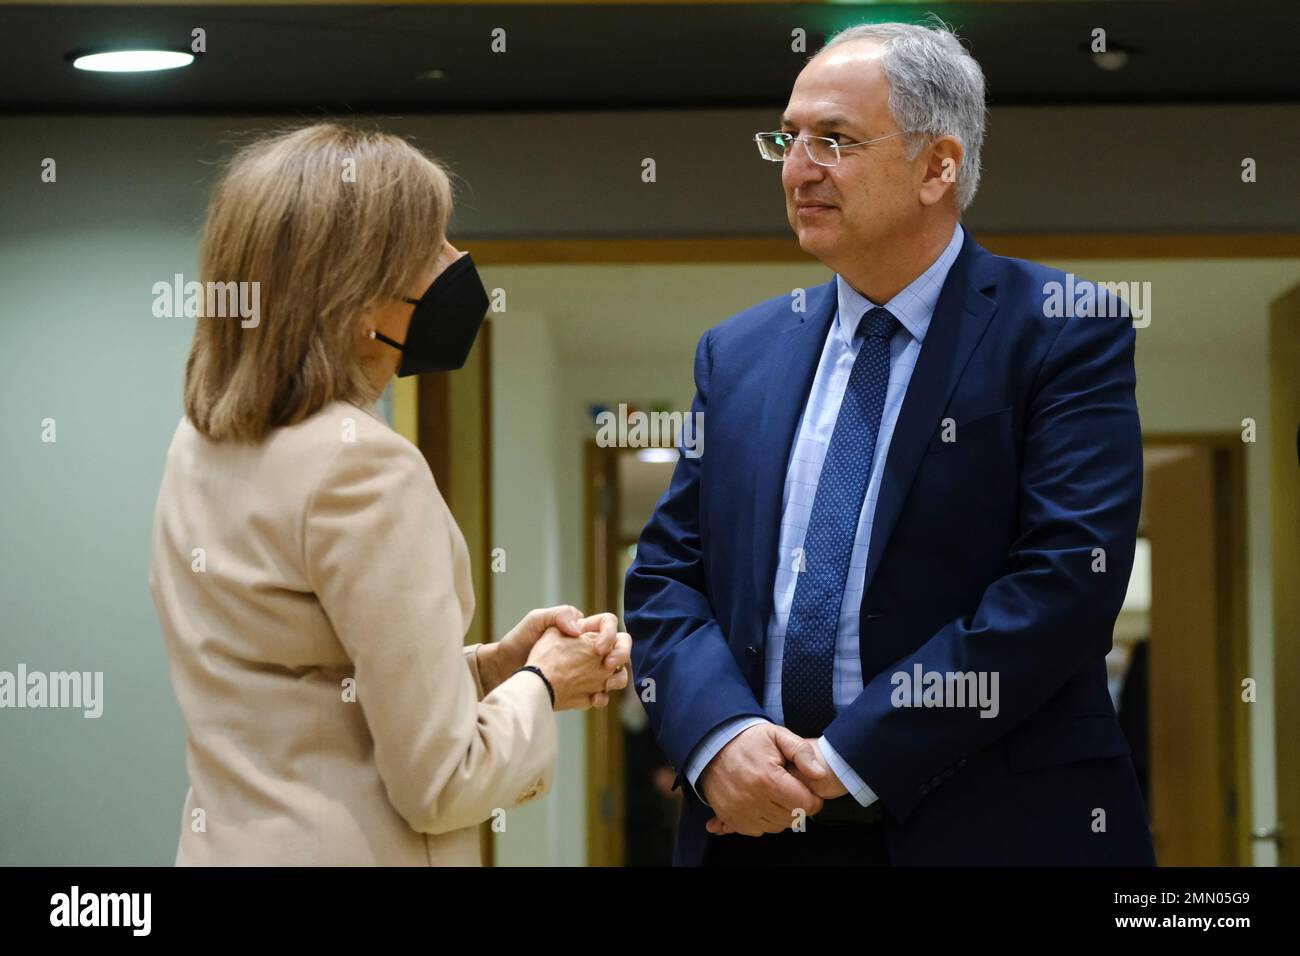 Brussels, Belgium. 30th Jan, 2023. Costas KADIS, minister arrives to attend in an European Council of Agriculture and Fisheries Council in Brussels, Belgium on Jan. 30, 2023. Credit: ALEXANDROS MICHAILIDIS/Alamy Live News Stock Photo